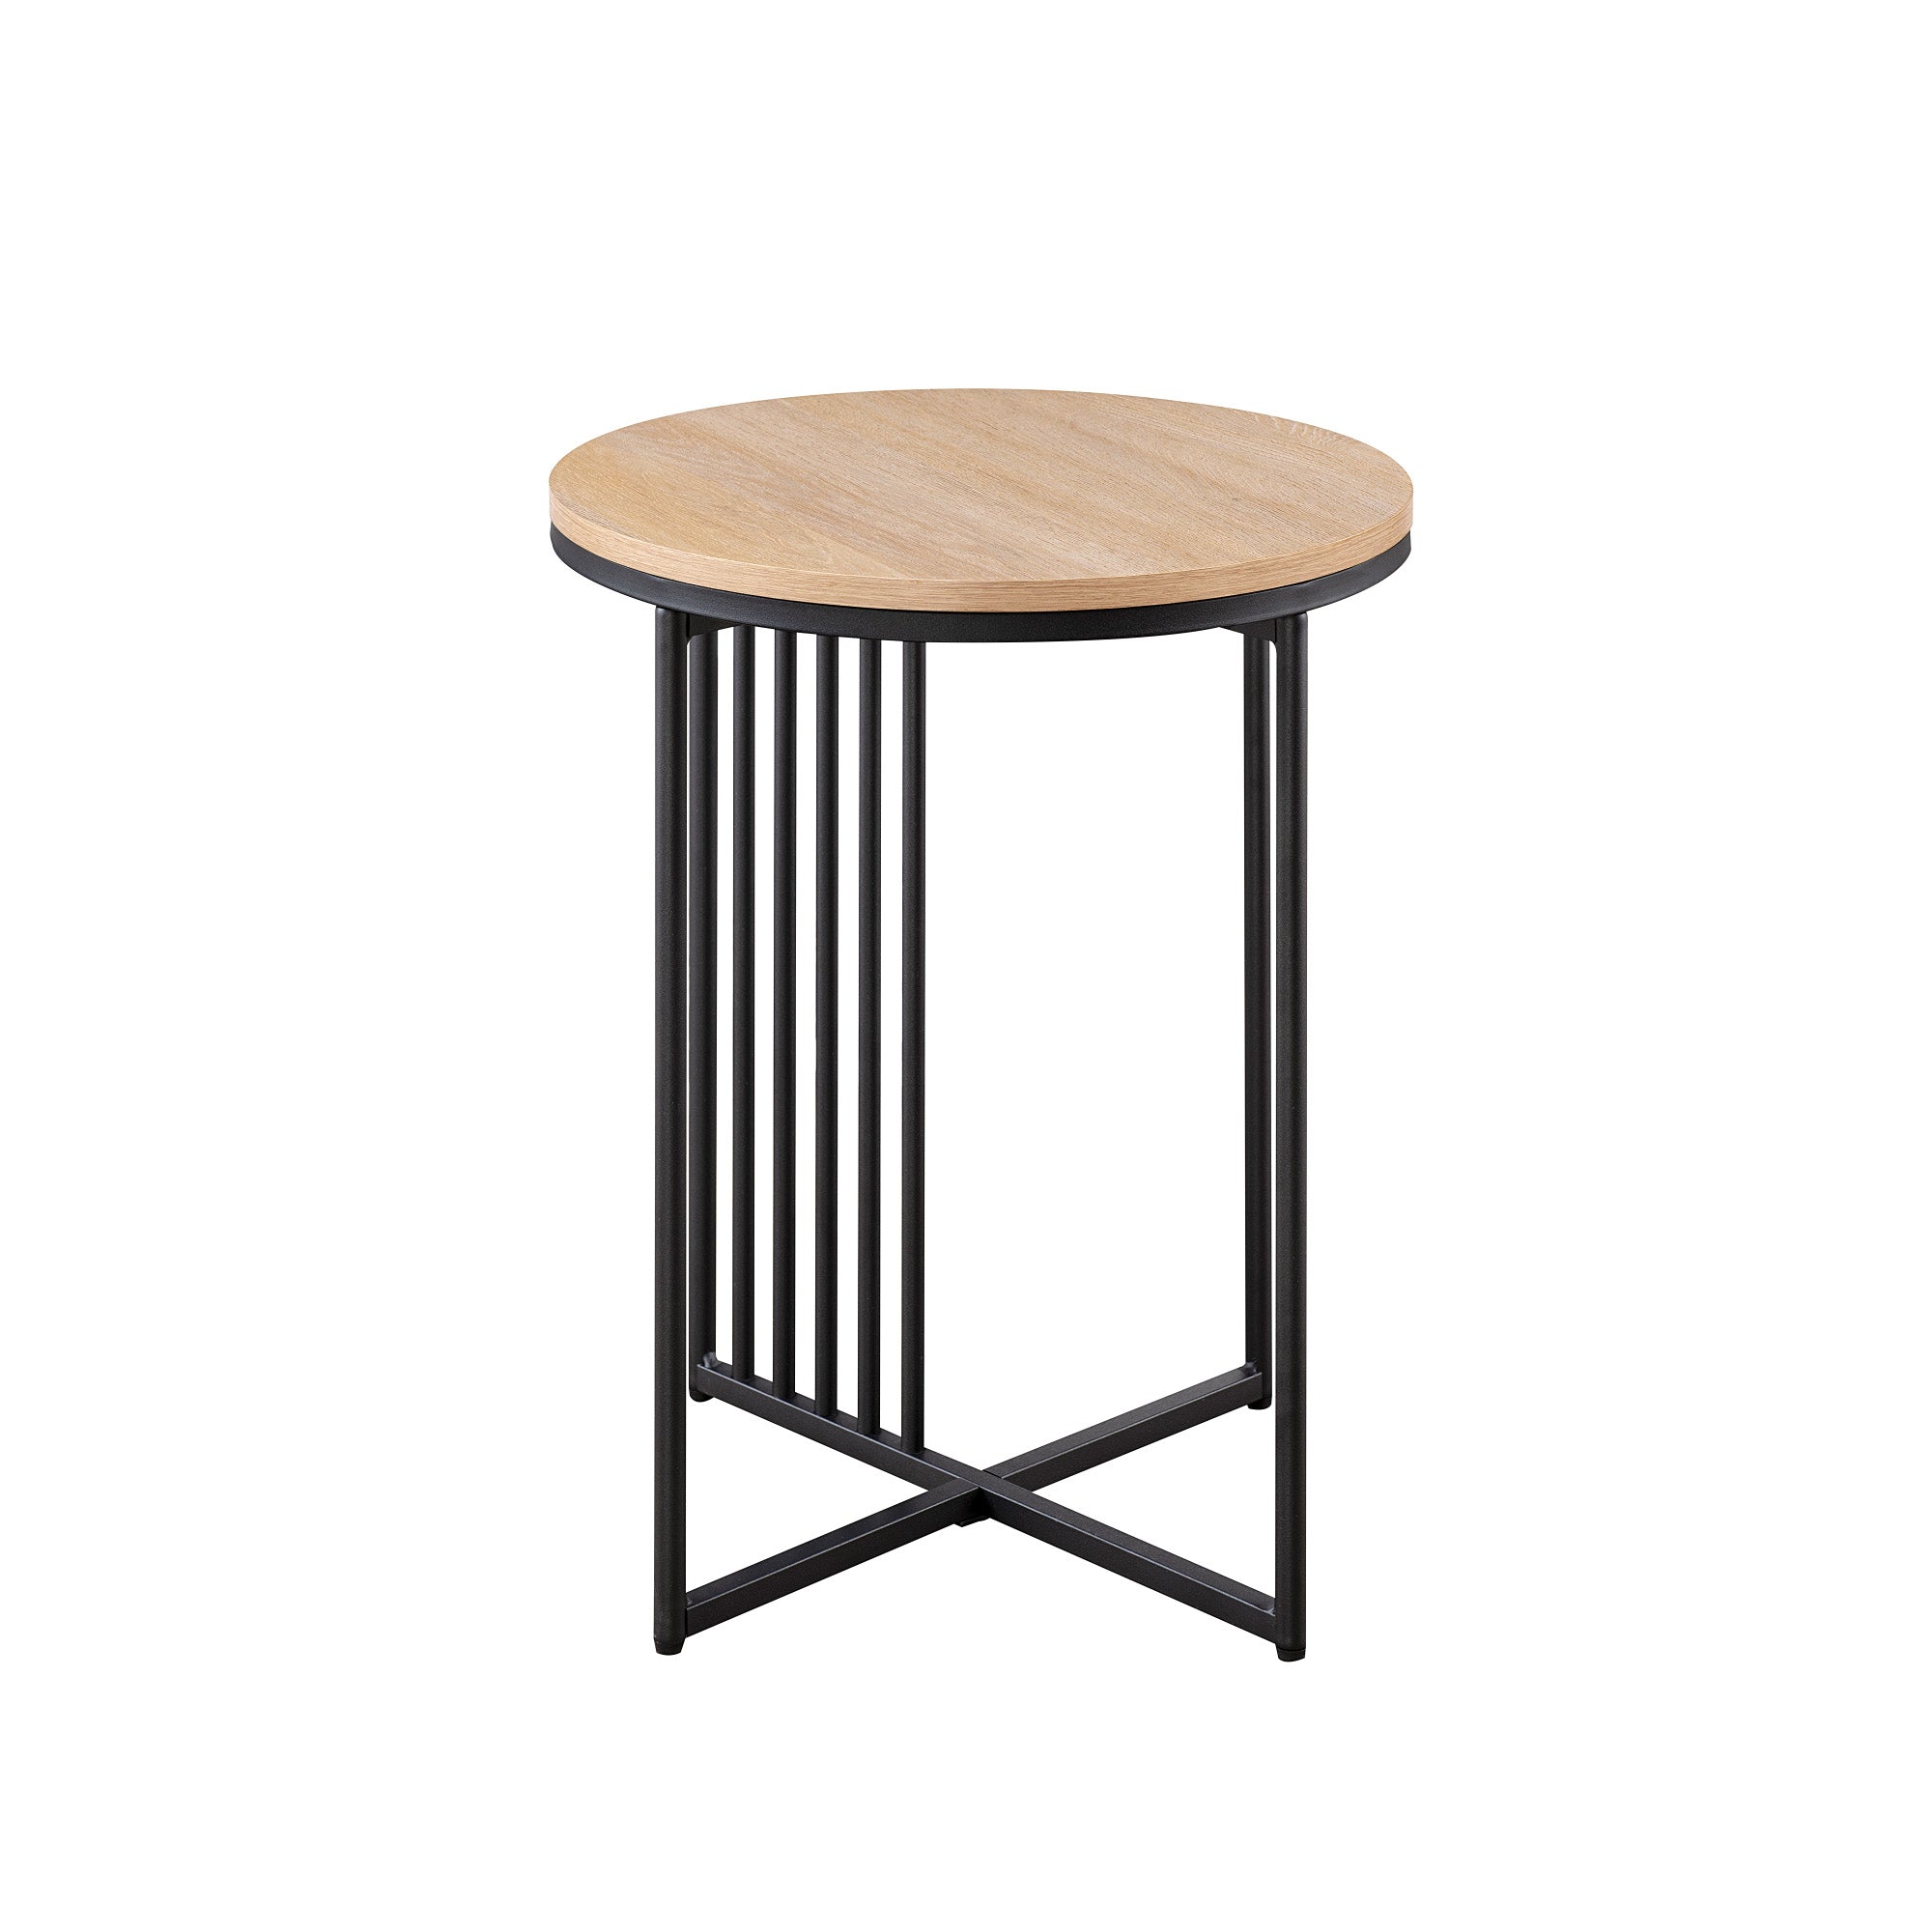 Metal-Slat Round Side Table - End Tables